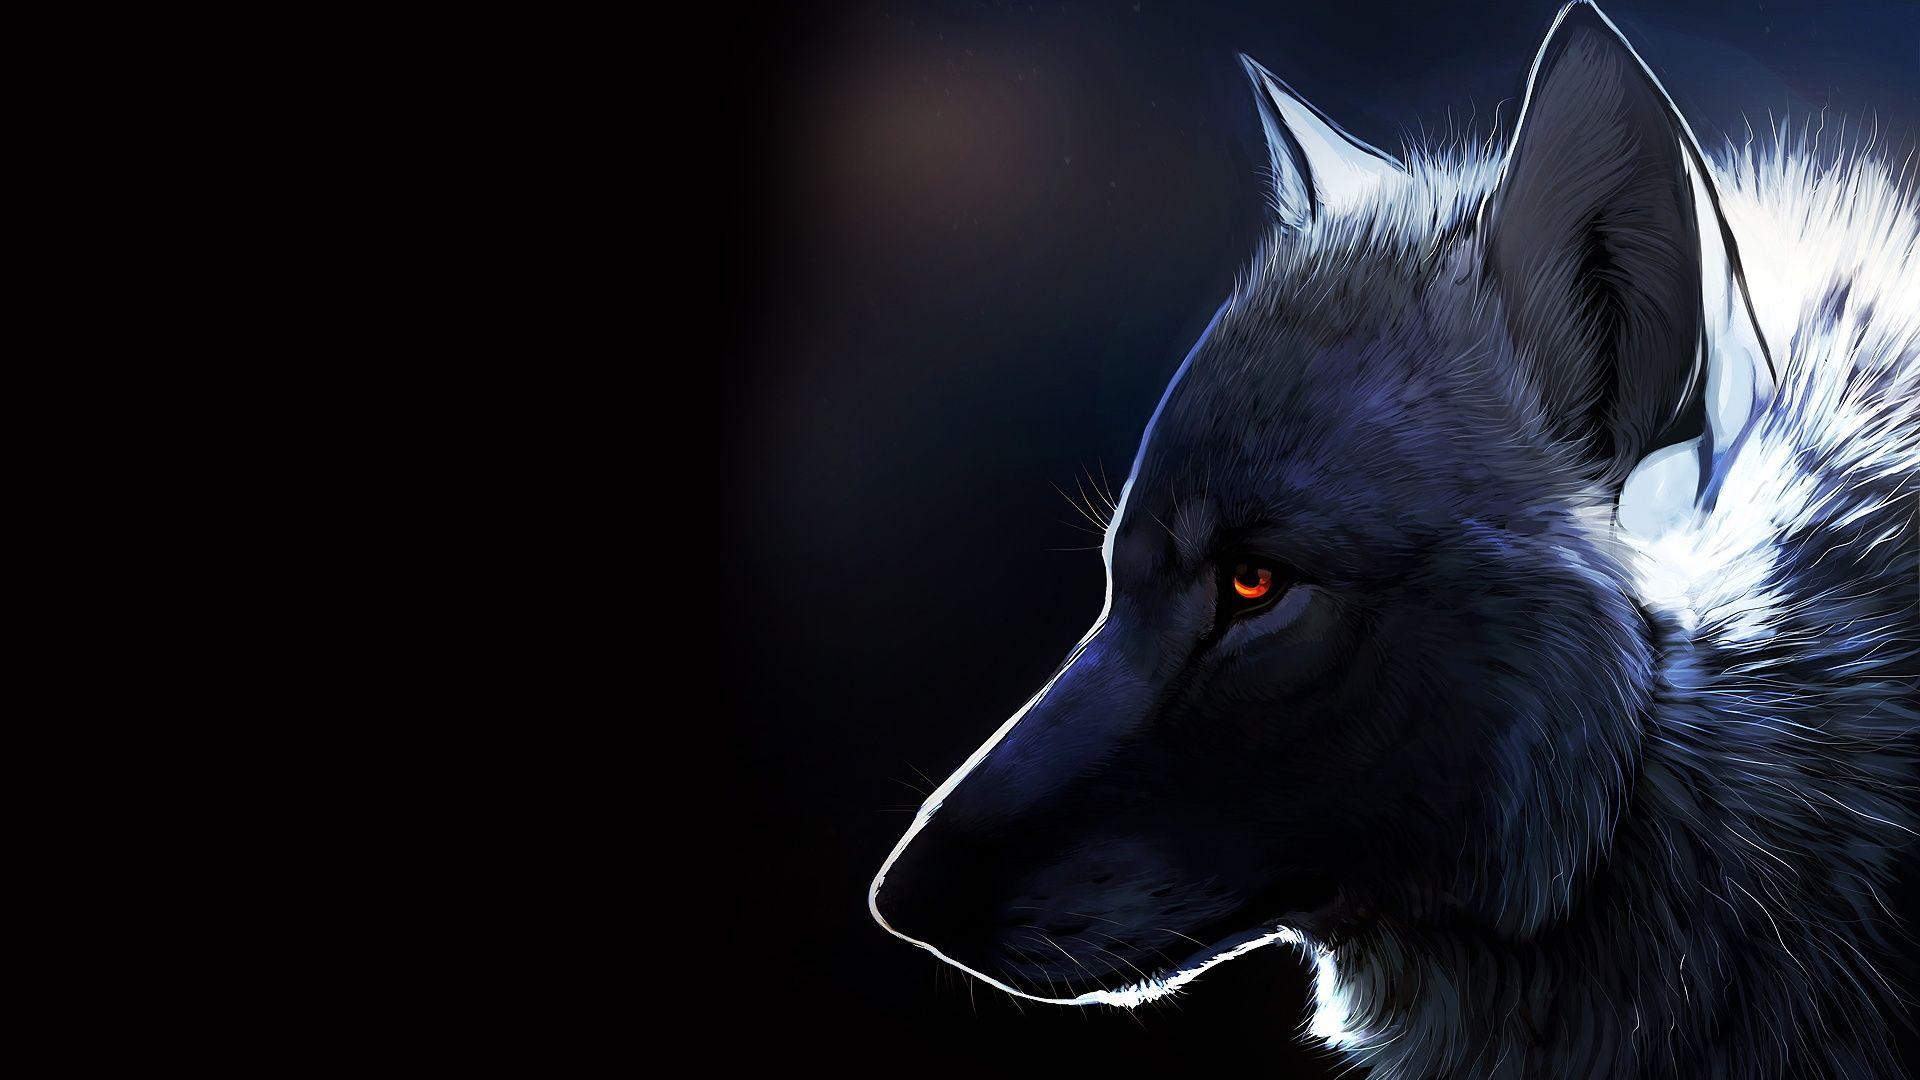 1920x1080 Animated Wolf Wallpaper Group 1920 × 1080 Animated Wolf Wallpaper Group